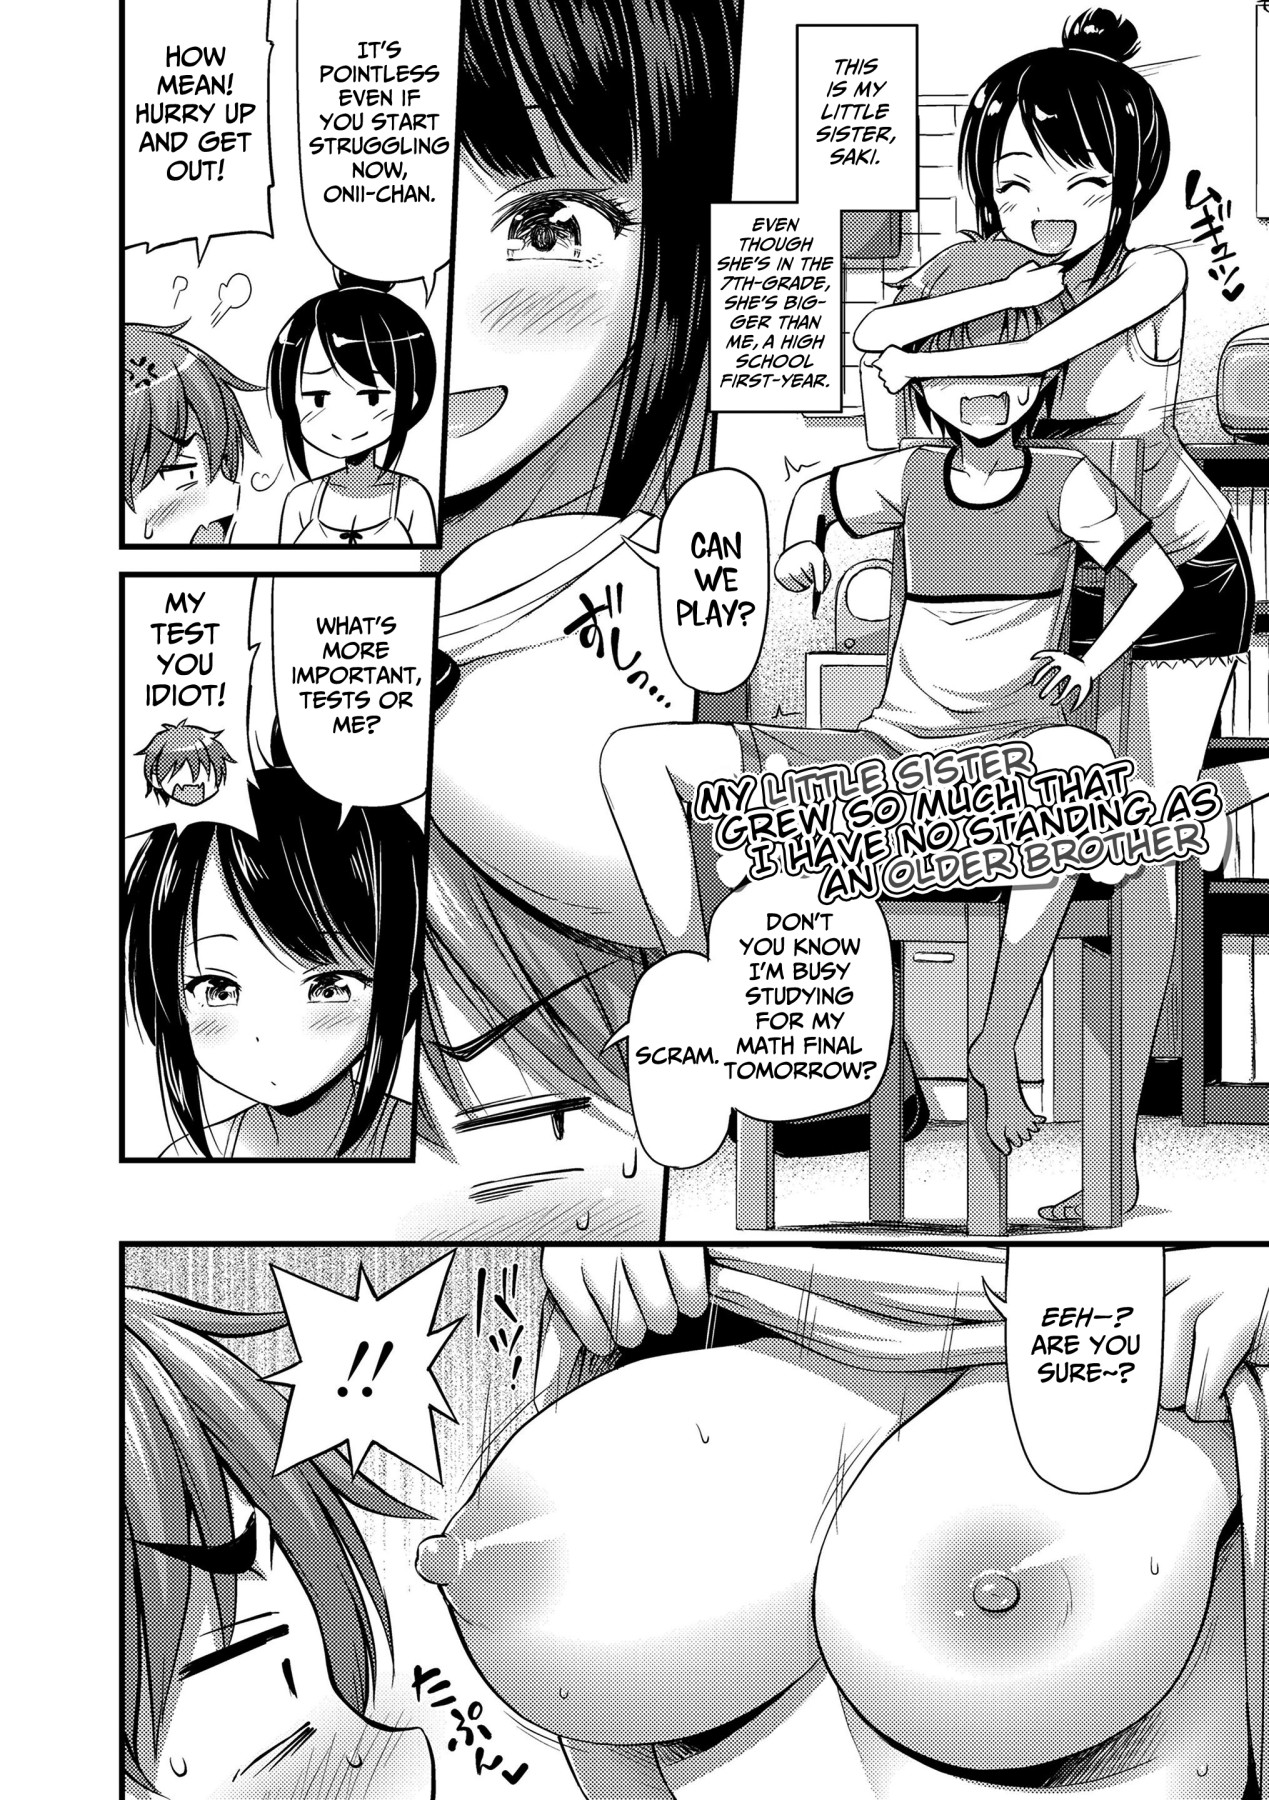 Hentai Manga Comic-My Little Sister Grew So Much That I Have No Standing as an Older Brother-Read-2